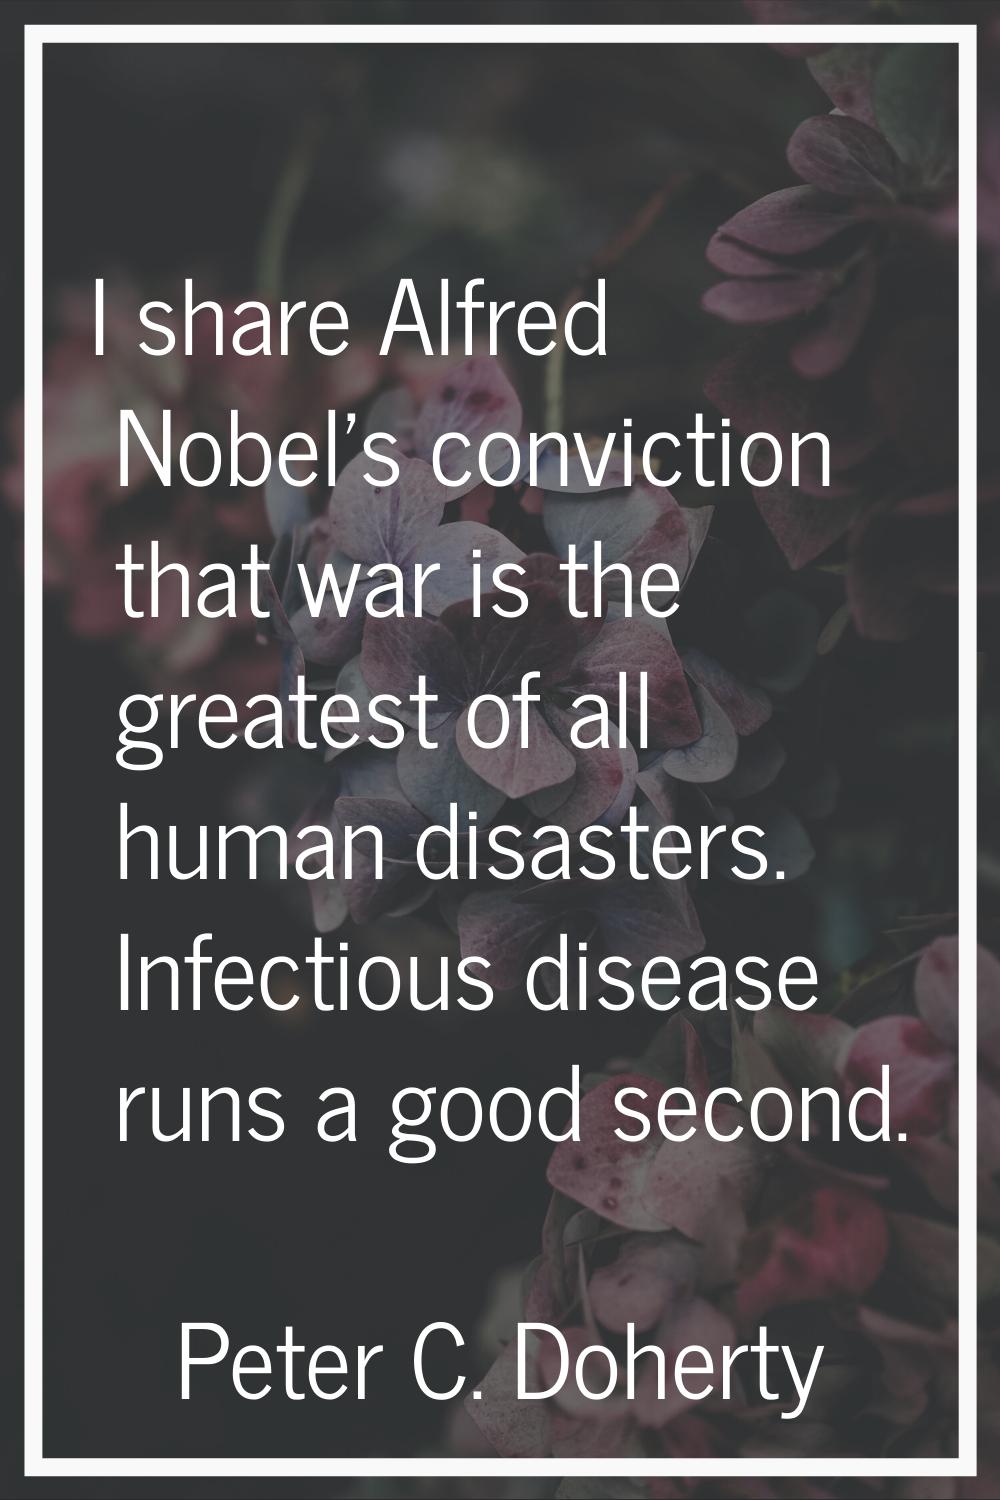 I share Alfred Nobel's conviction that war is the greatest of all human disasters. Infectious disea